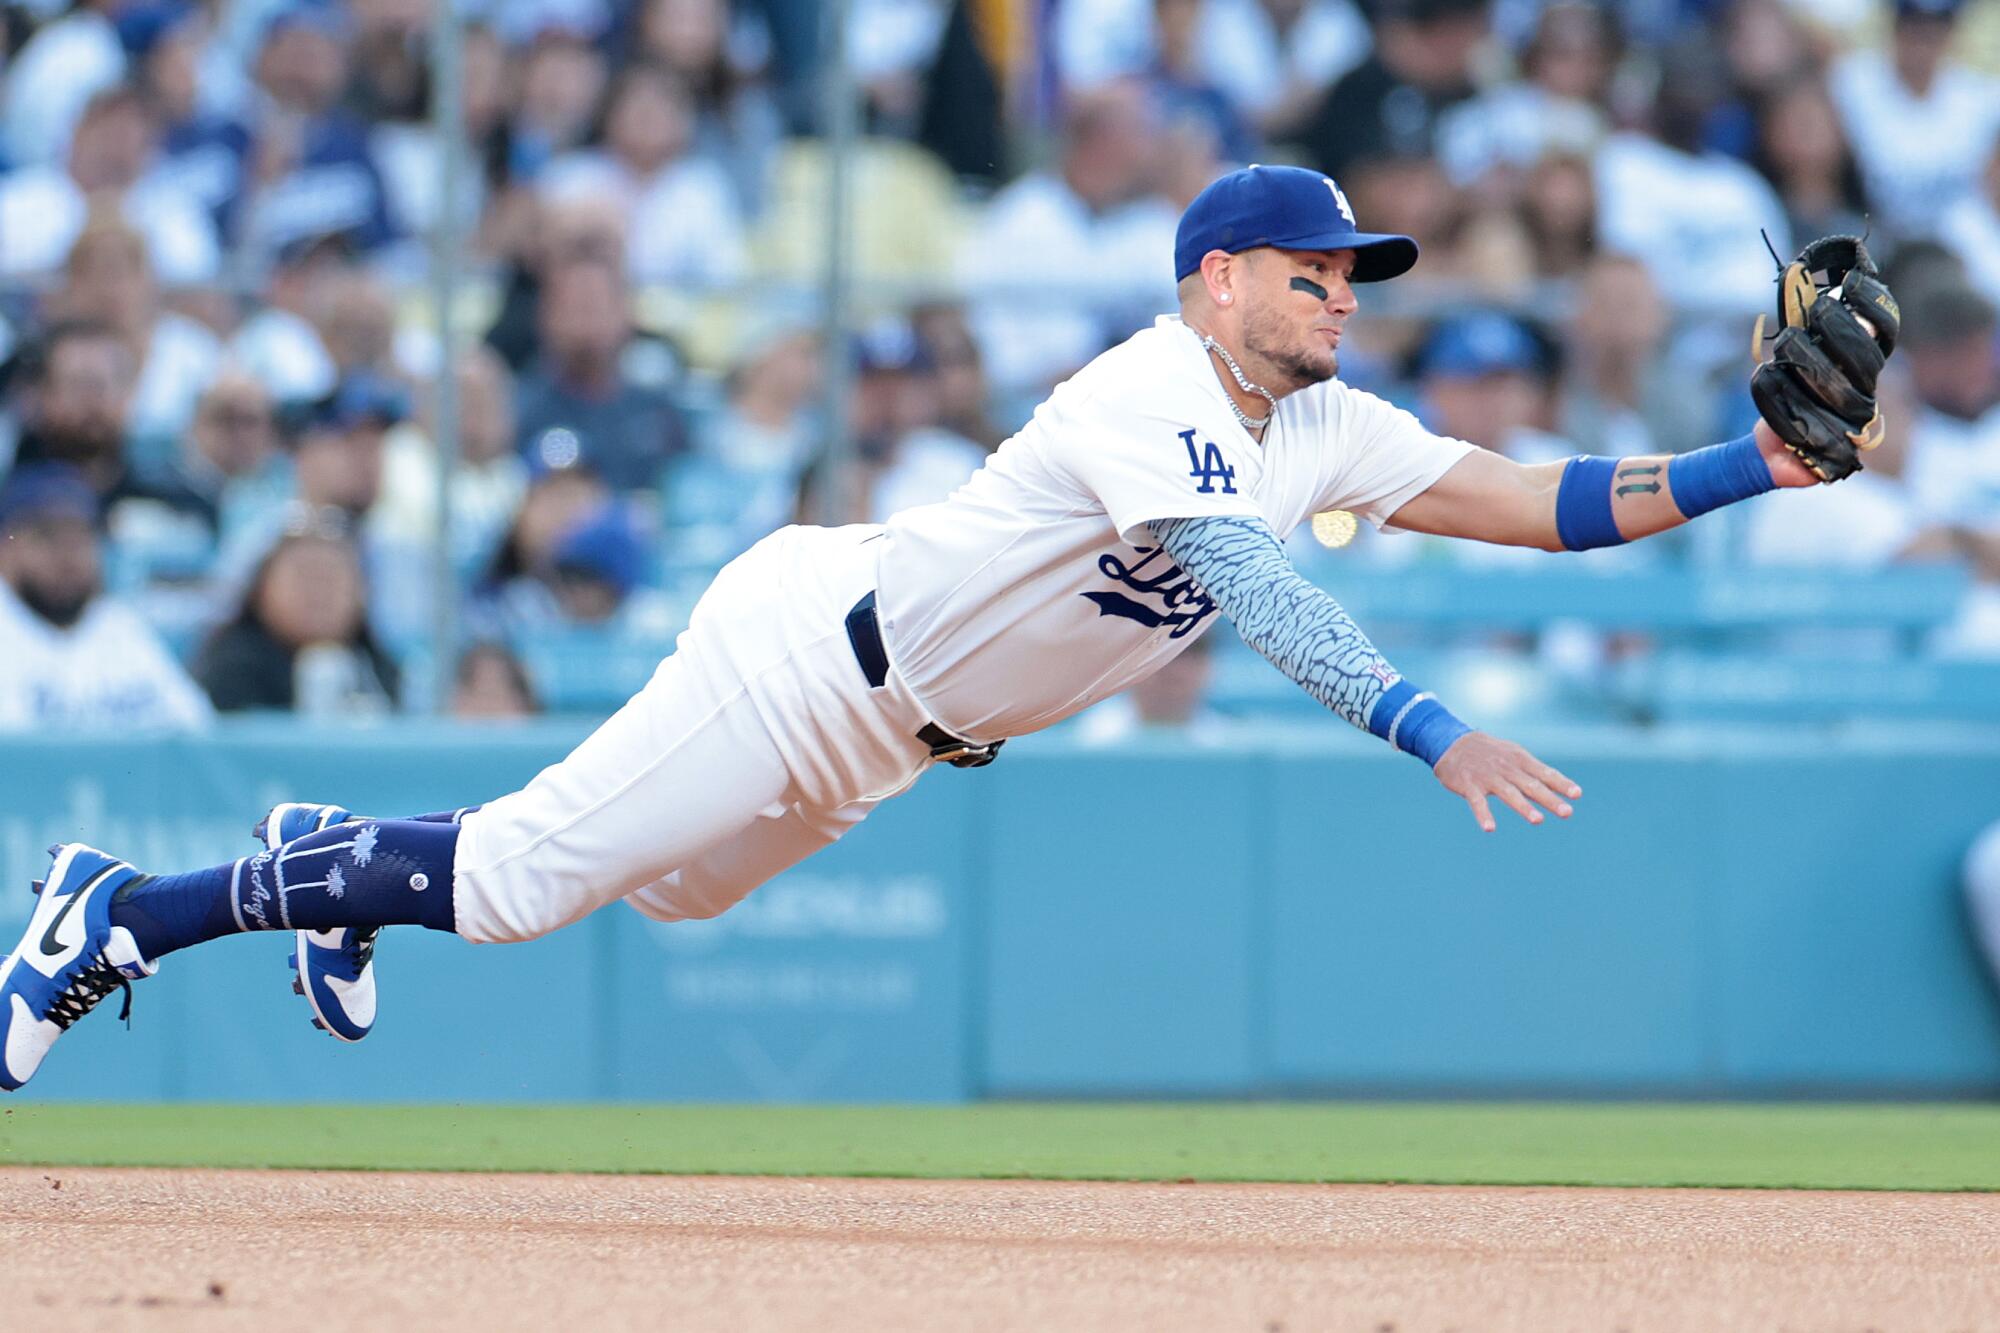 Dodgers shortstop Miguel Rojas makes a diving catch on a liner hit by the Rangers' Marcus Semien at Dodger Stadium.